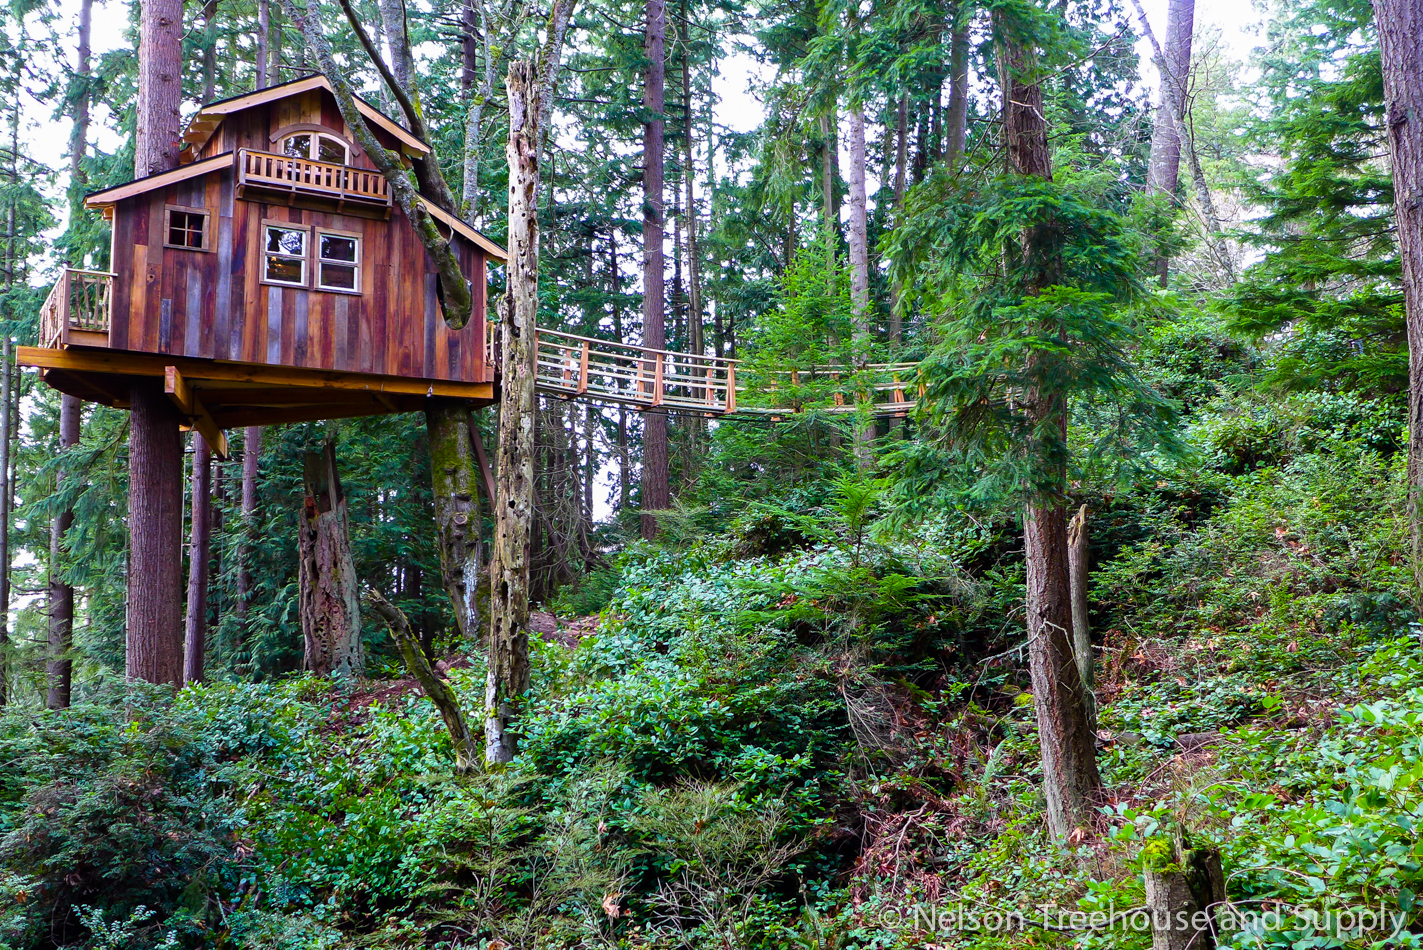  Pirate Treehouse in Washington State 